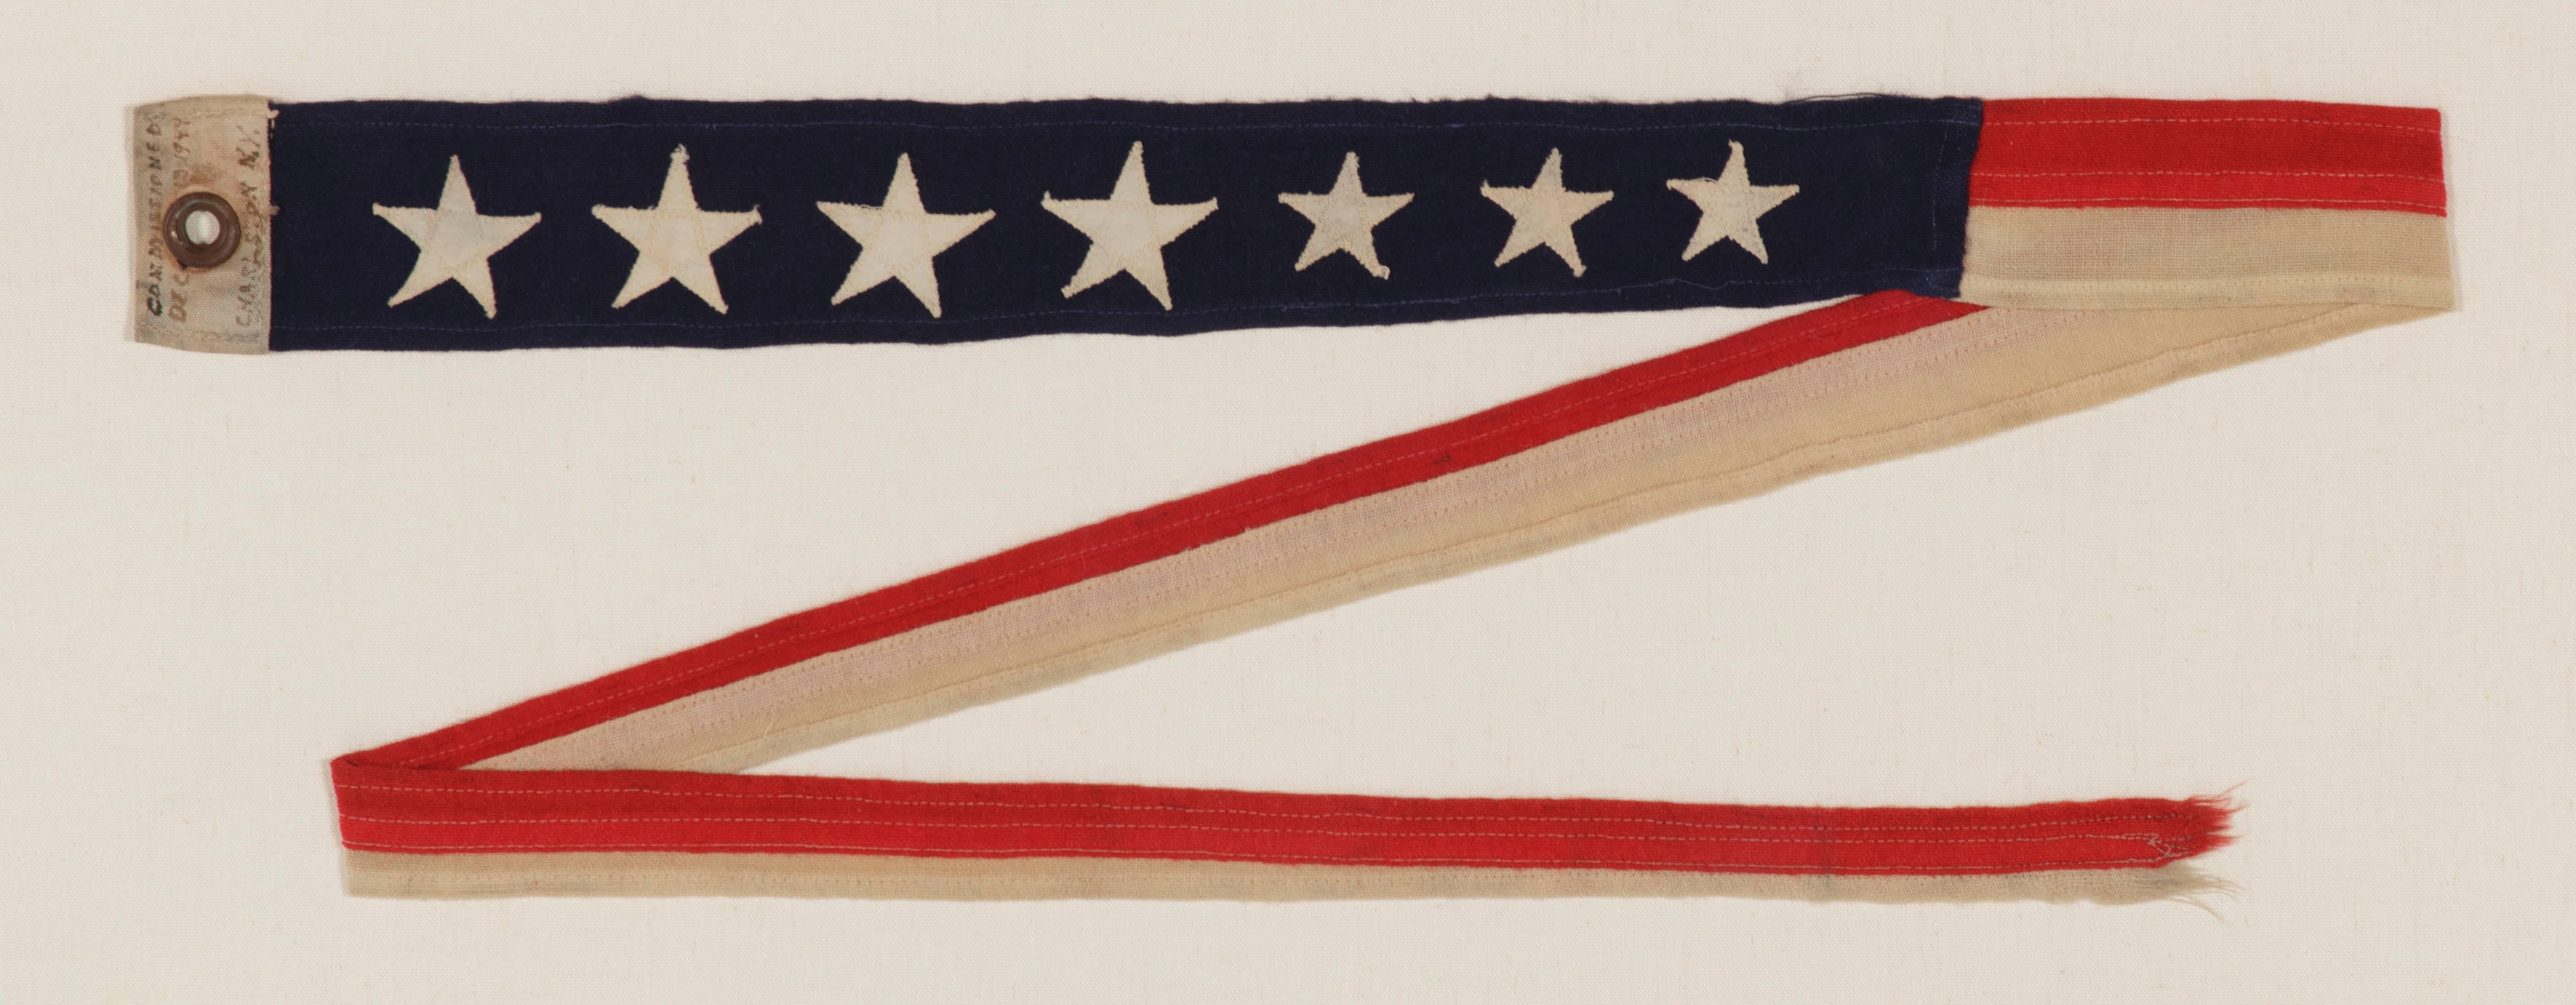 WWII U.S. NAVY COMMISSIONING PENNANT FROM THE U.S.S. CASWELL, TOLLAND-CLASS ATTACK CARGO SHIP, COMMISSIONED DEC. 13, 1944, THAT PARTICIPATED IN OKINAWA IN SUPPORT OF THE 6TH MARINES:

 7 star U.S. Navy commissioning pennant from the U.S.S. Caswell